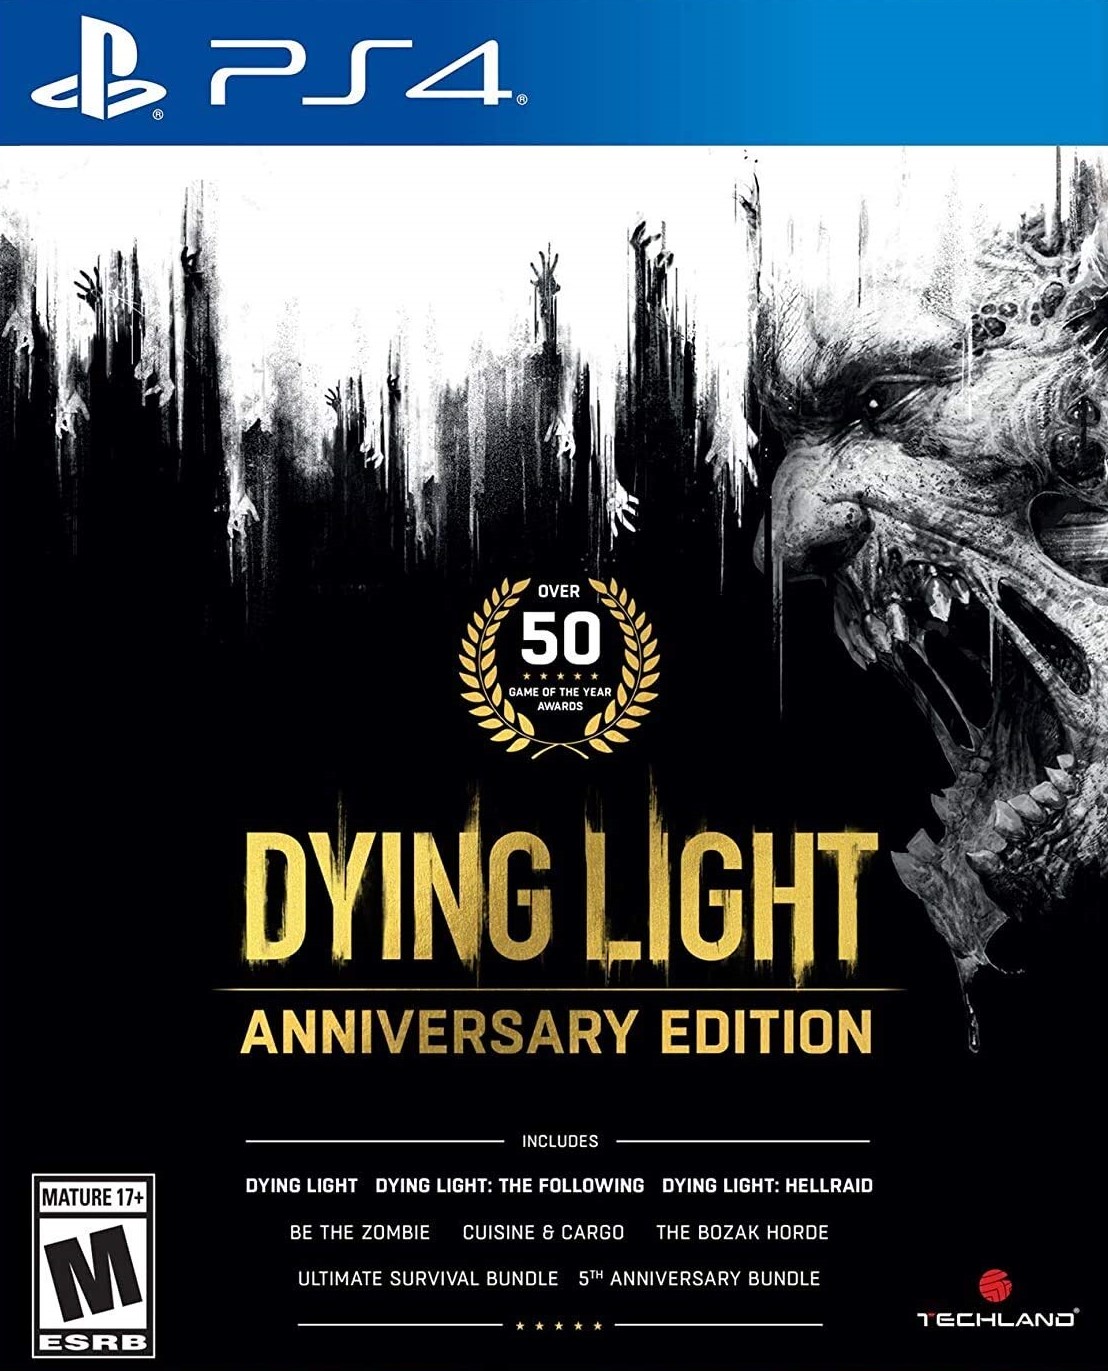 Dying Light Anniversary Edition, Square Enix, PlayStation 4 - image 1 of 13